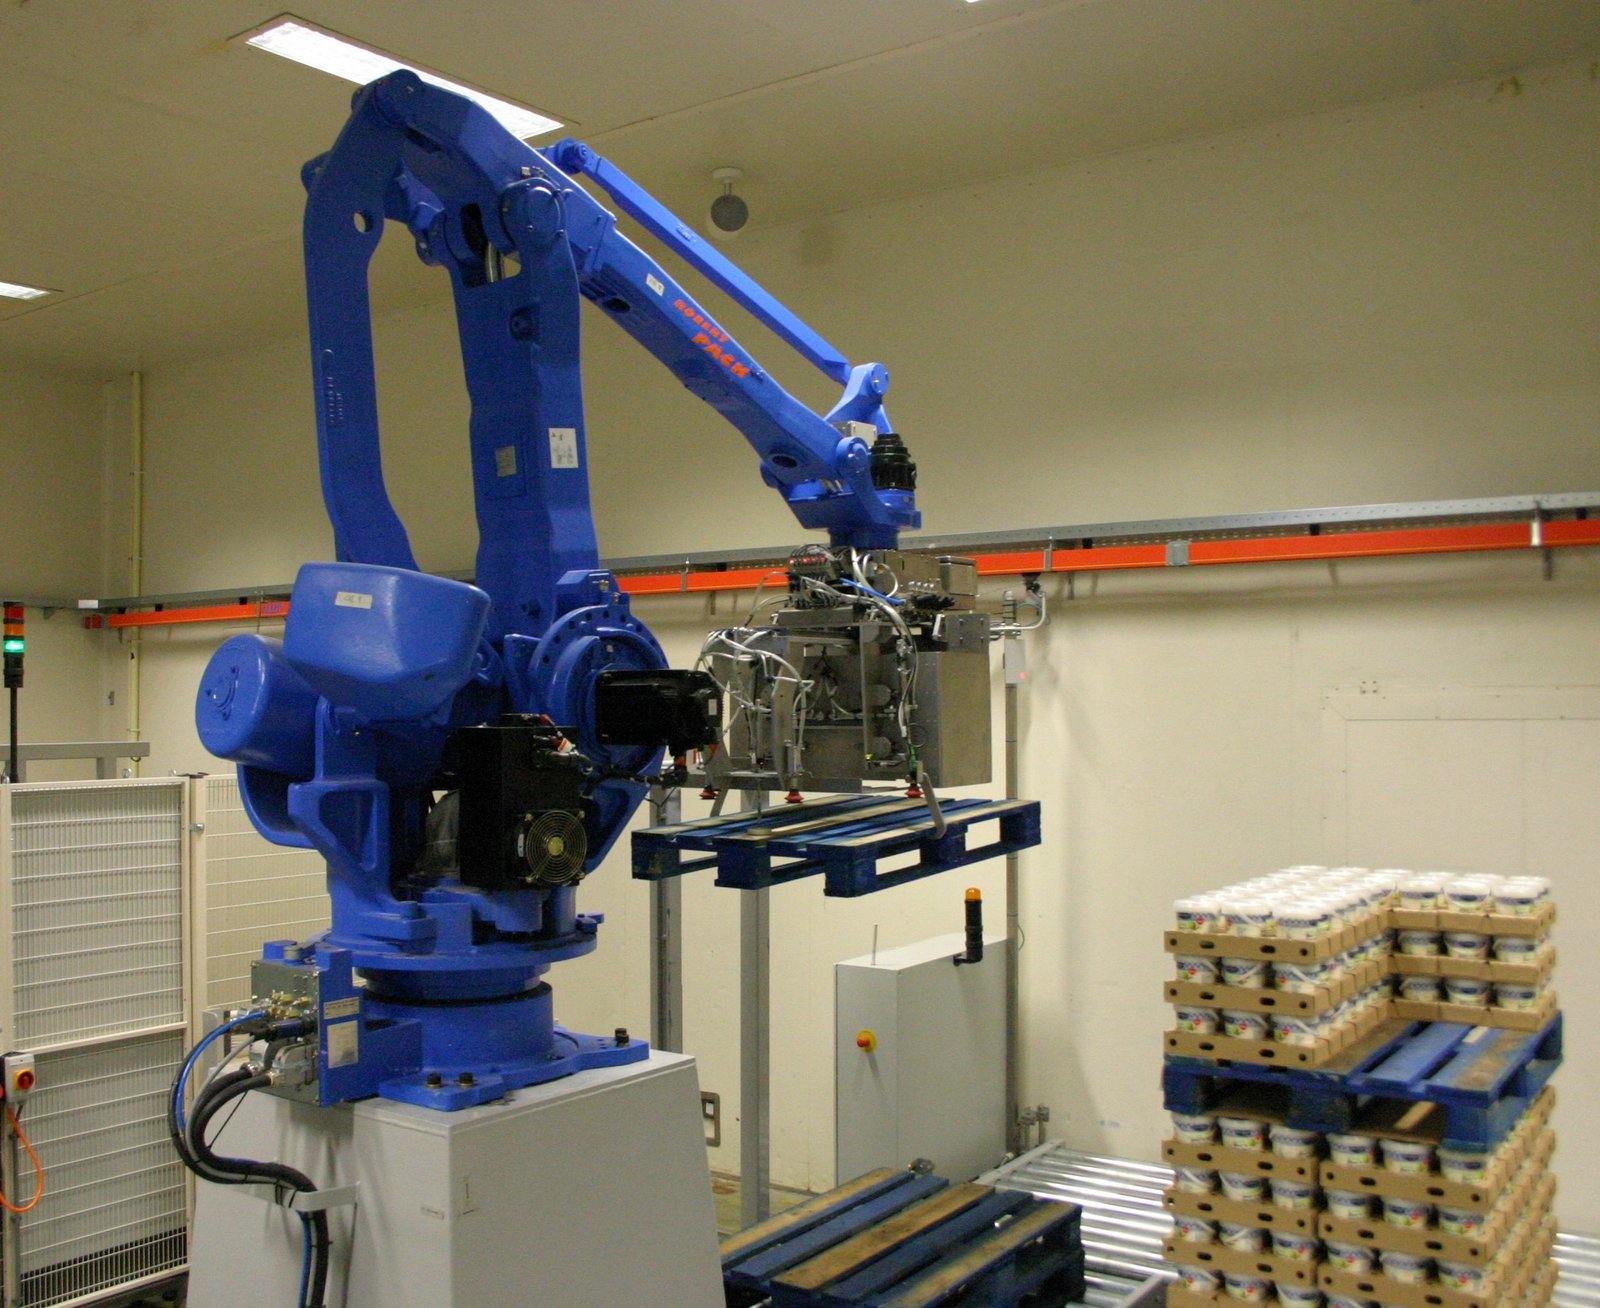 Yaskawa-Robertpack-palletising-robot-for-palletising-trays-with-desserts-from-the-Zuivelhoeve